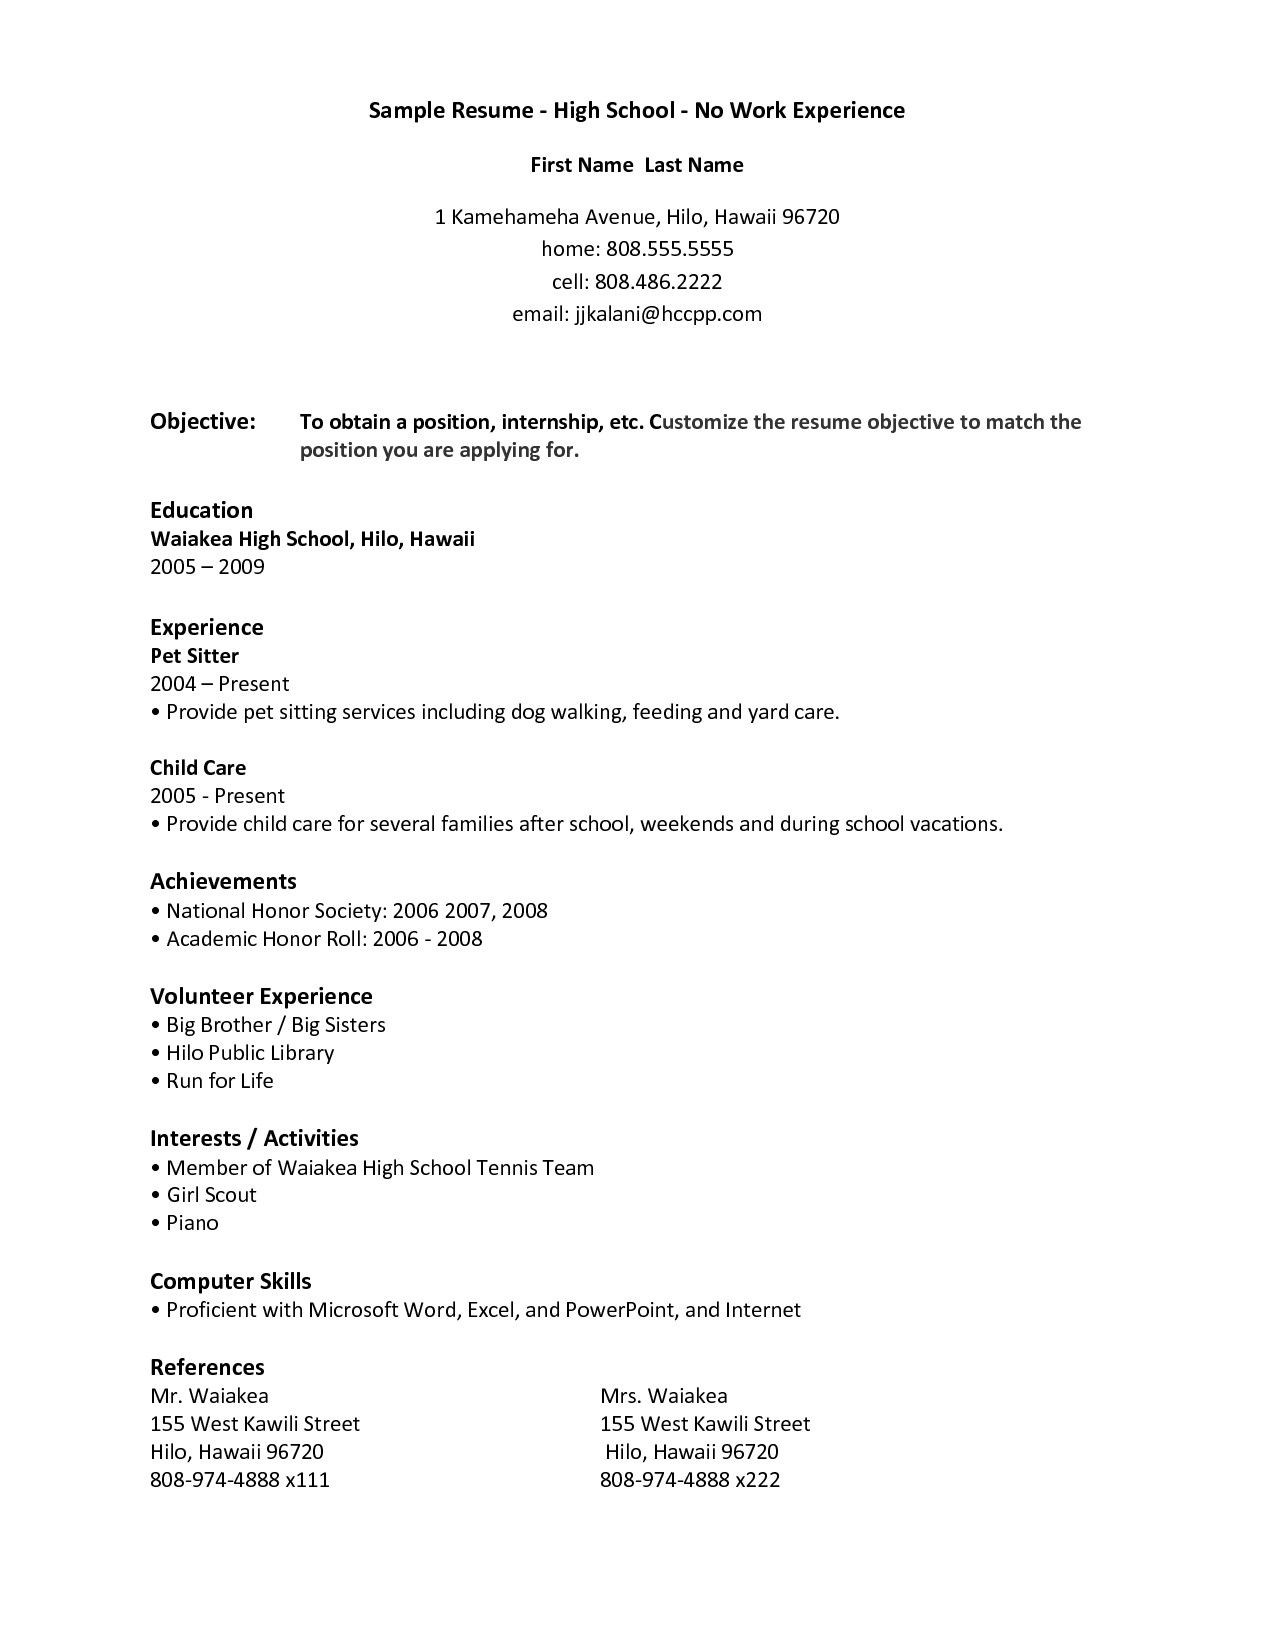 Sample Resume for College Student with No Work History Free Resume Templates No Work Experience #experience …